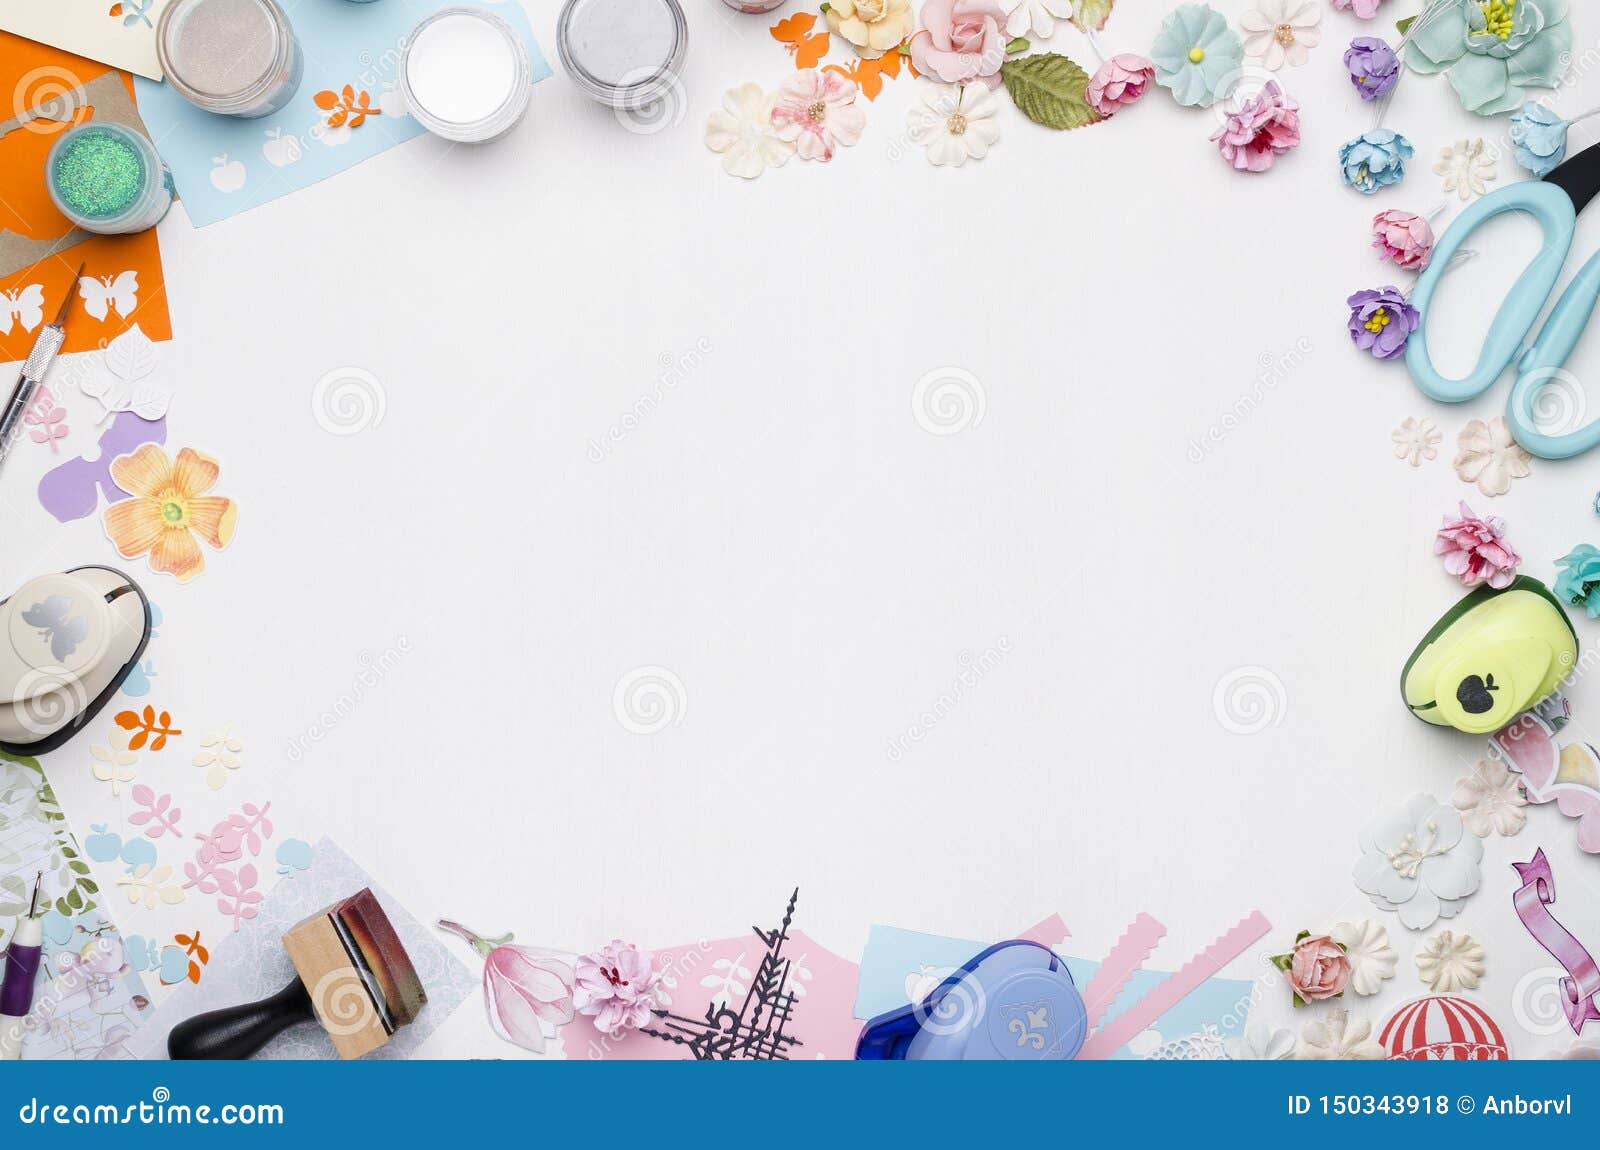 empty white space in the center surrounded by paper flowers, multi-colored paper and scrapbooking materials